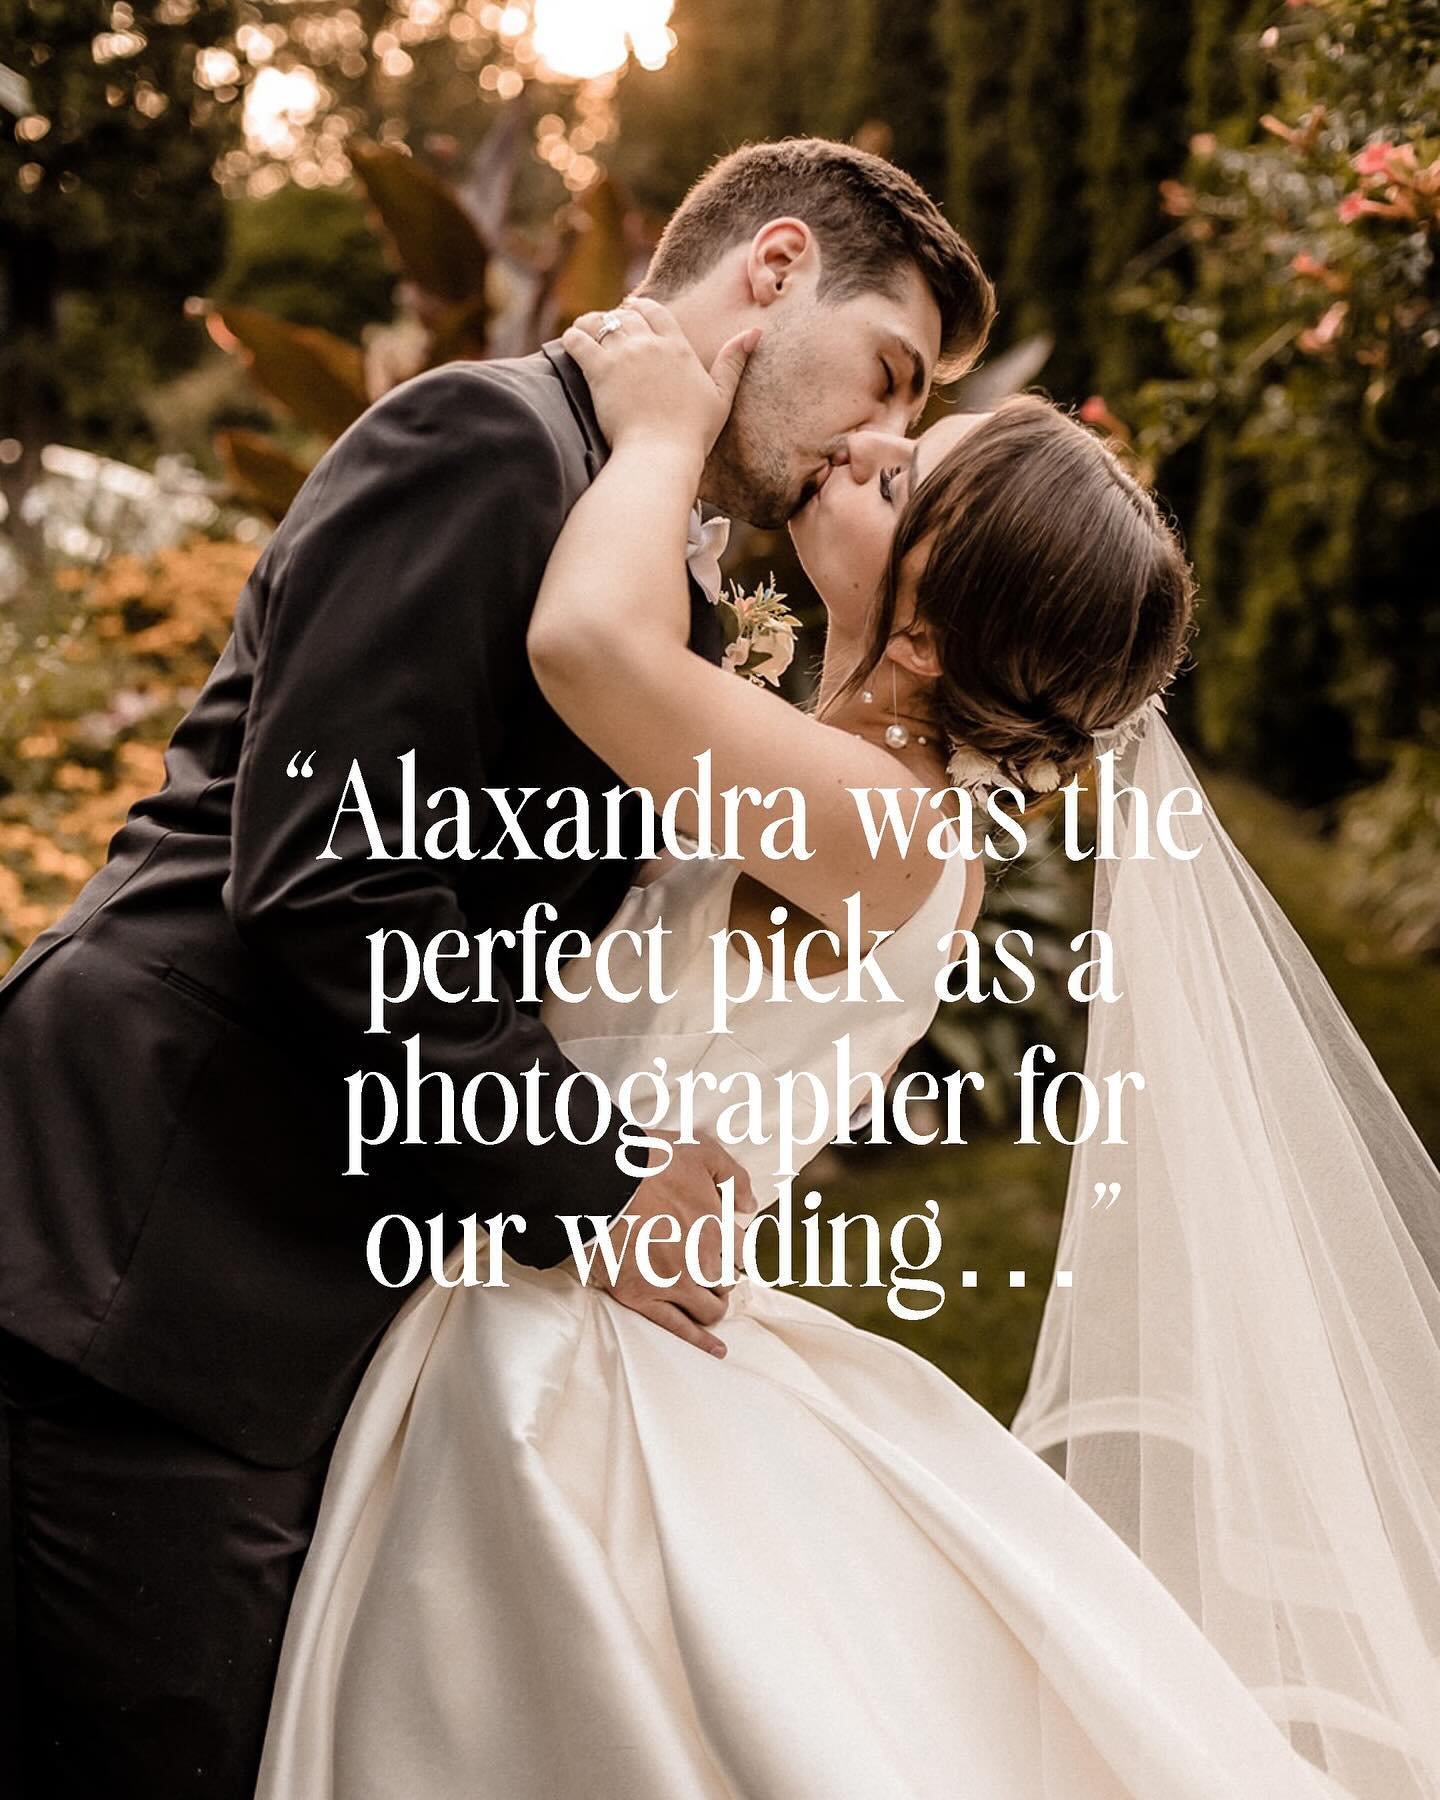 Lauren + Tylor&rsquo;s Testimony has me in tears 🥹 Here&rsquo;s the full review: ⭐️⭐️⭐️⭐️⭐️Alaxandra was the perfect pick as a photographer for our wedding. There is not another photographer out there who will go the distance that she does with cari